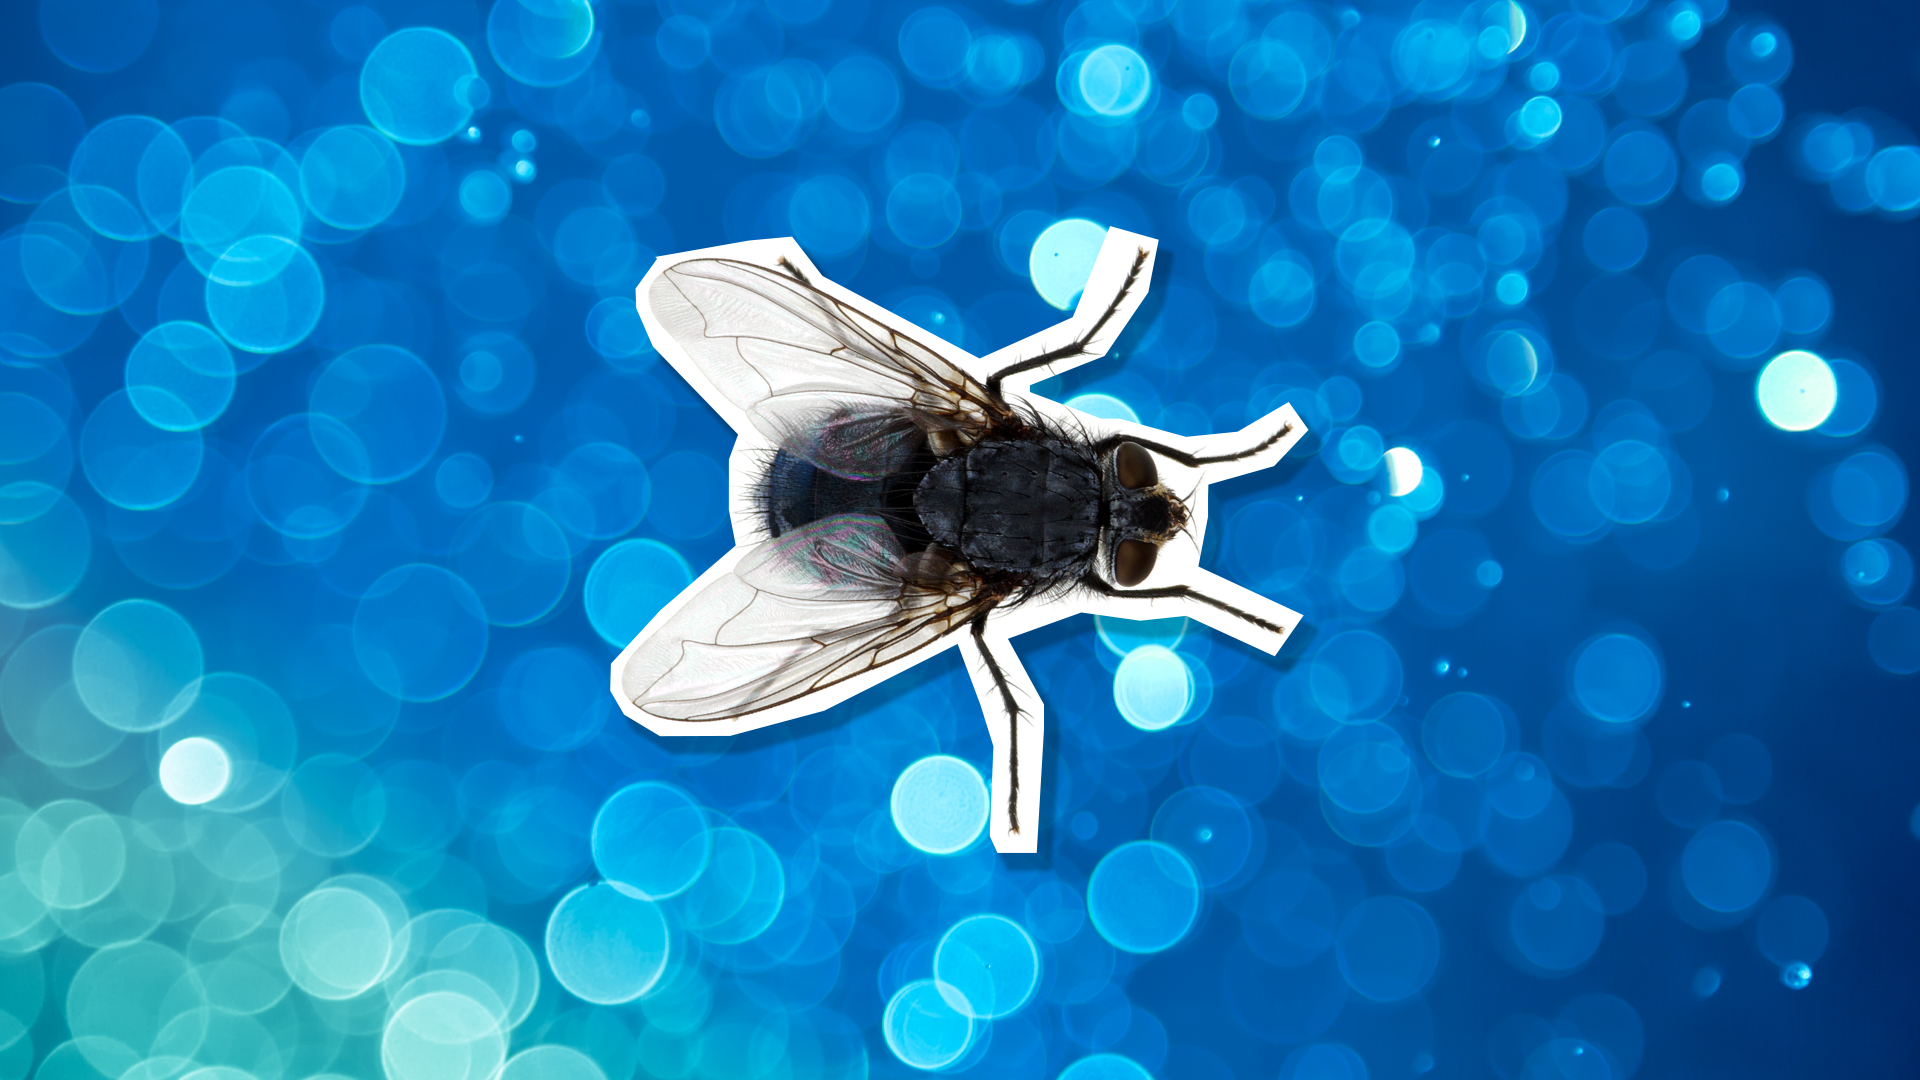 A fly on a blue background